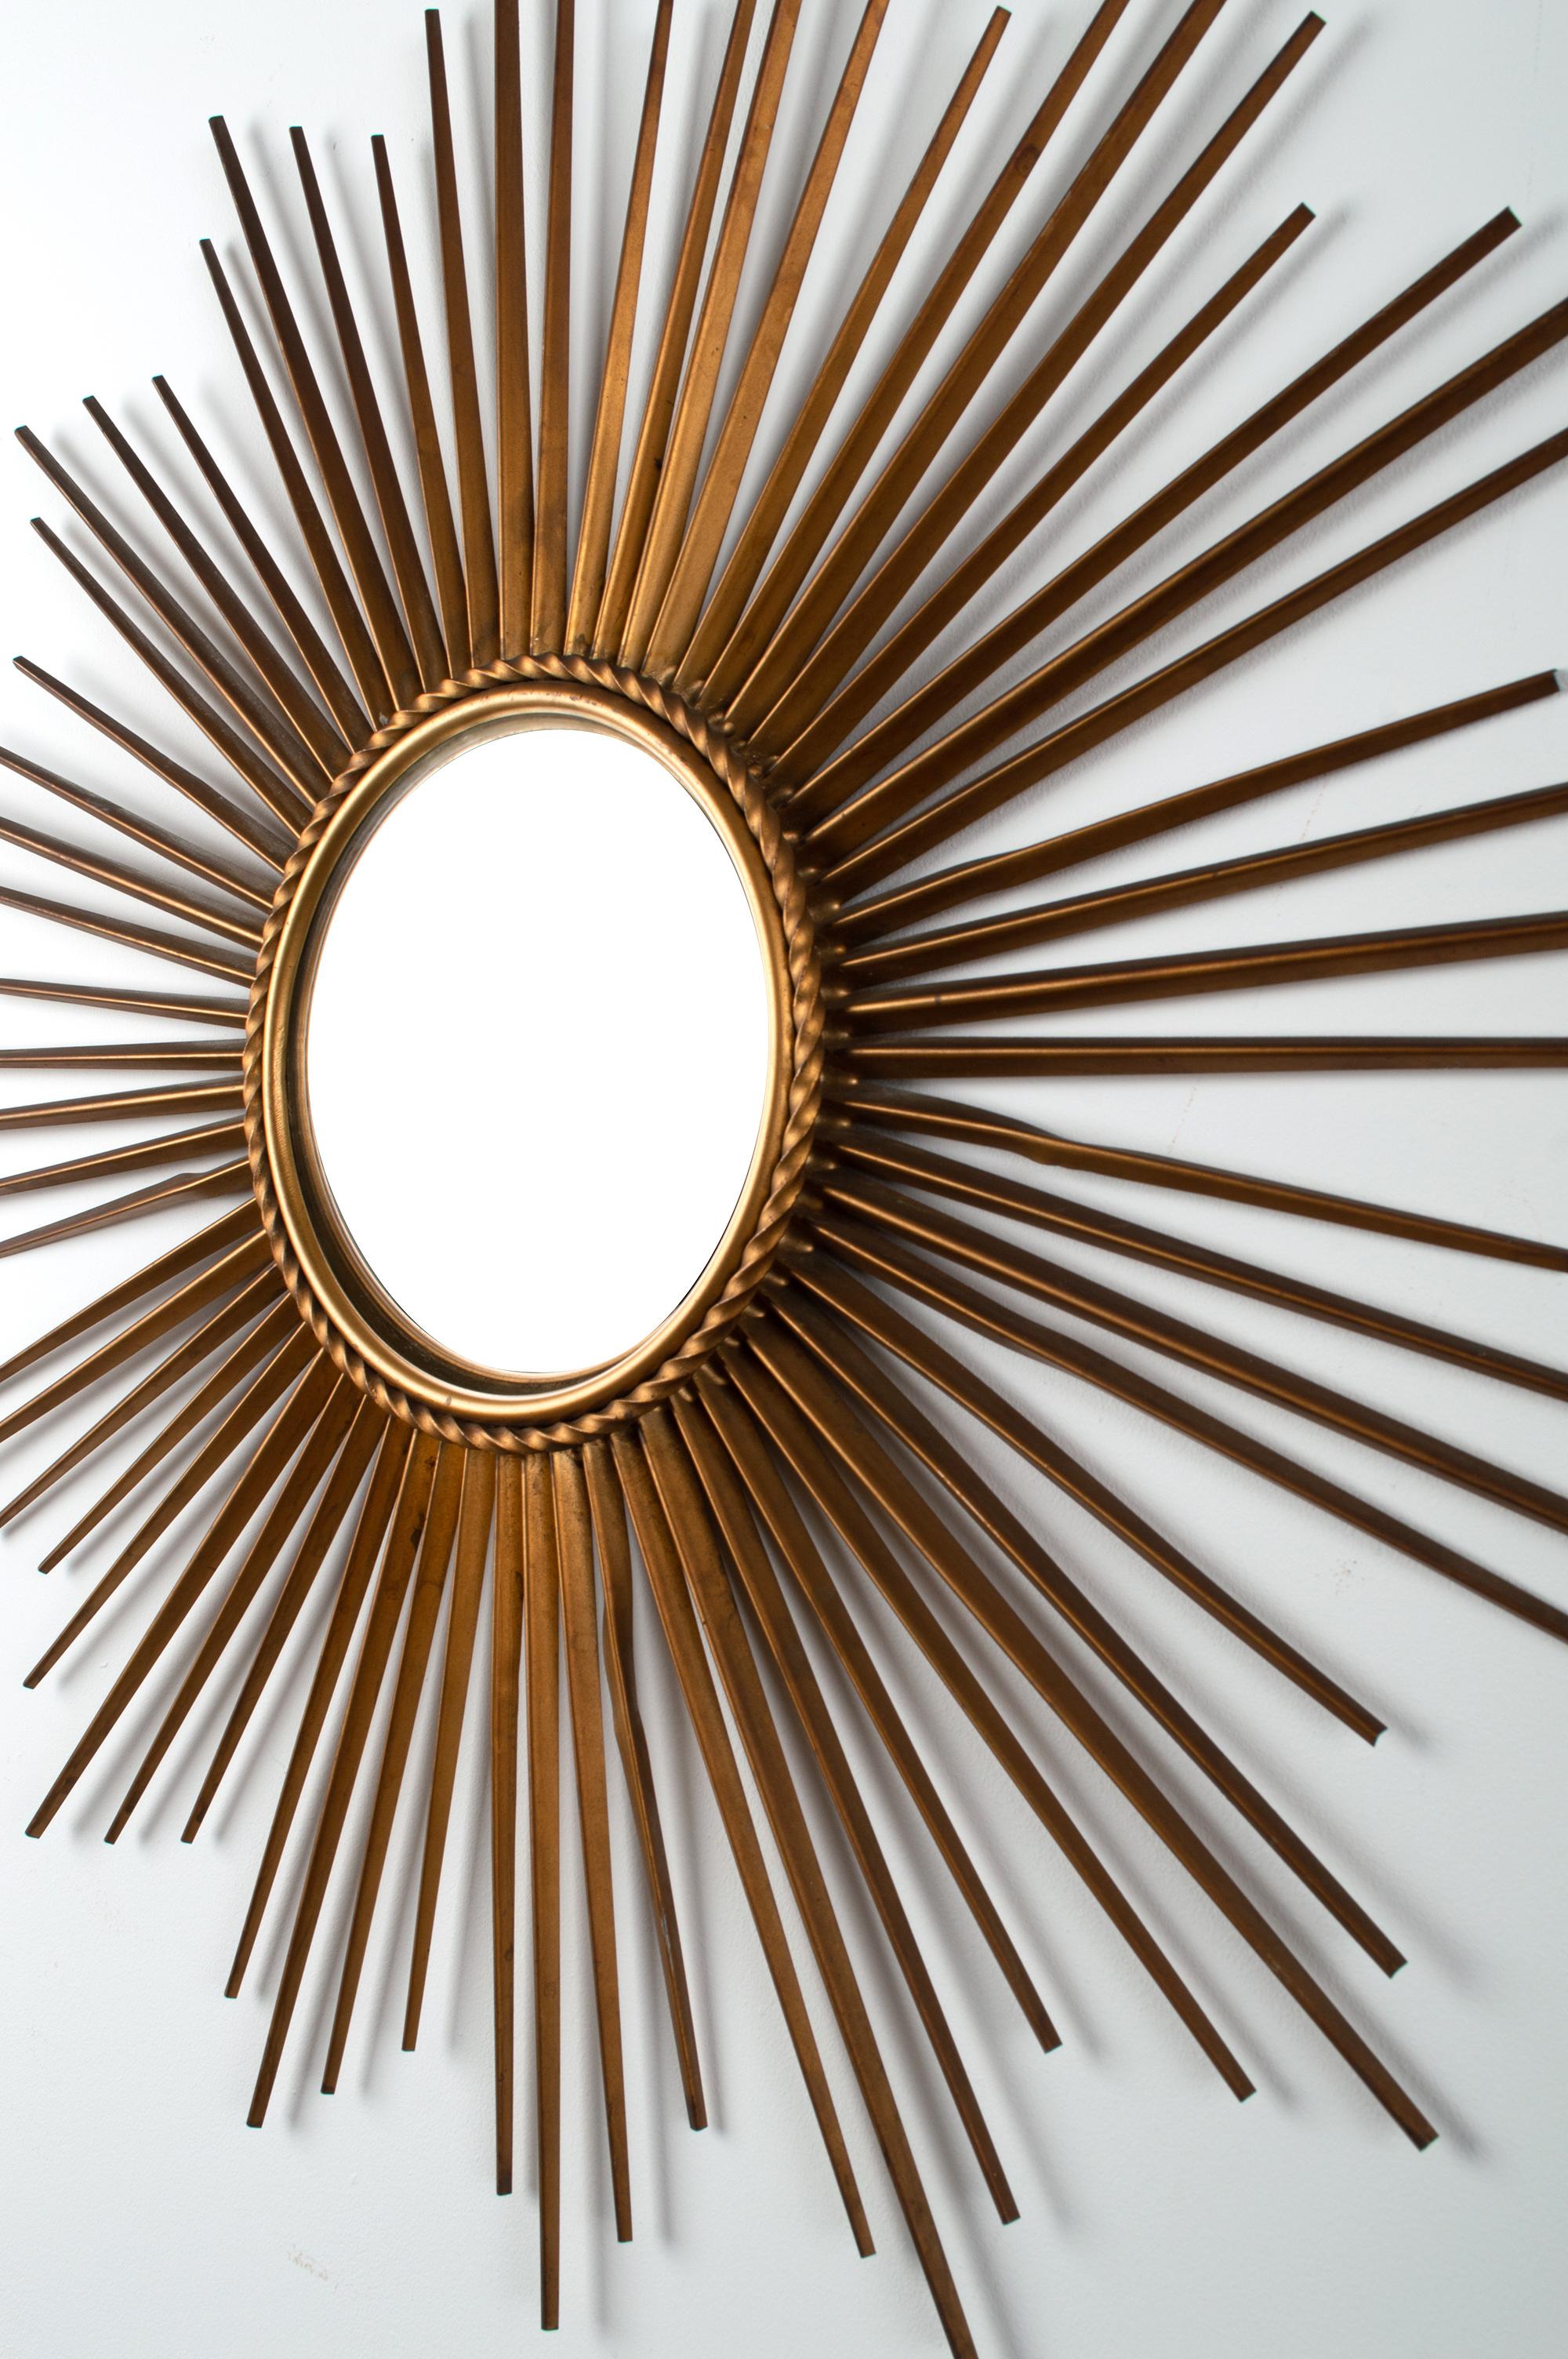 French Large Midcentury Sunburst Convex Mirror by Chaty Vallarius, France, circa 1950 For Sale